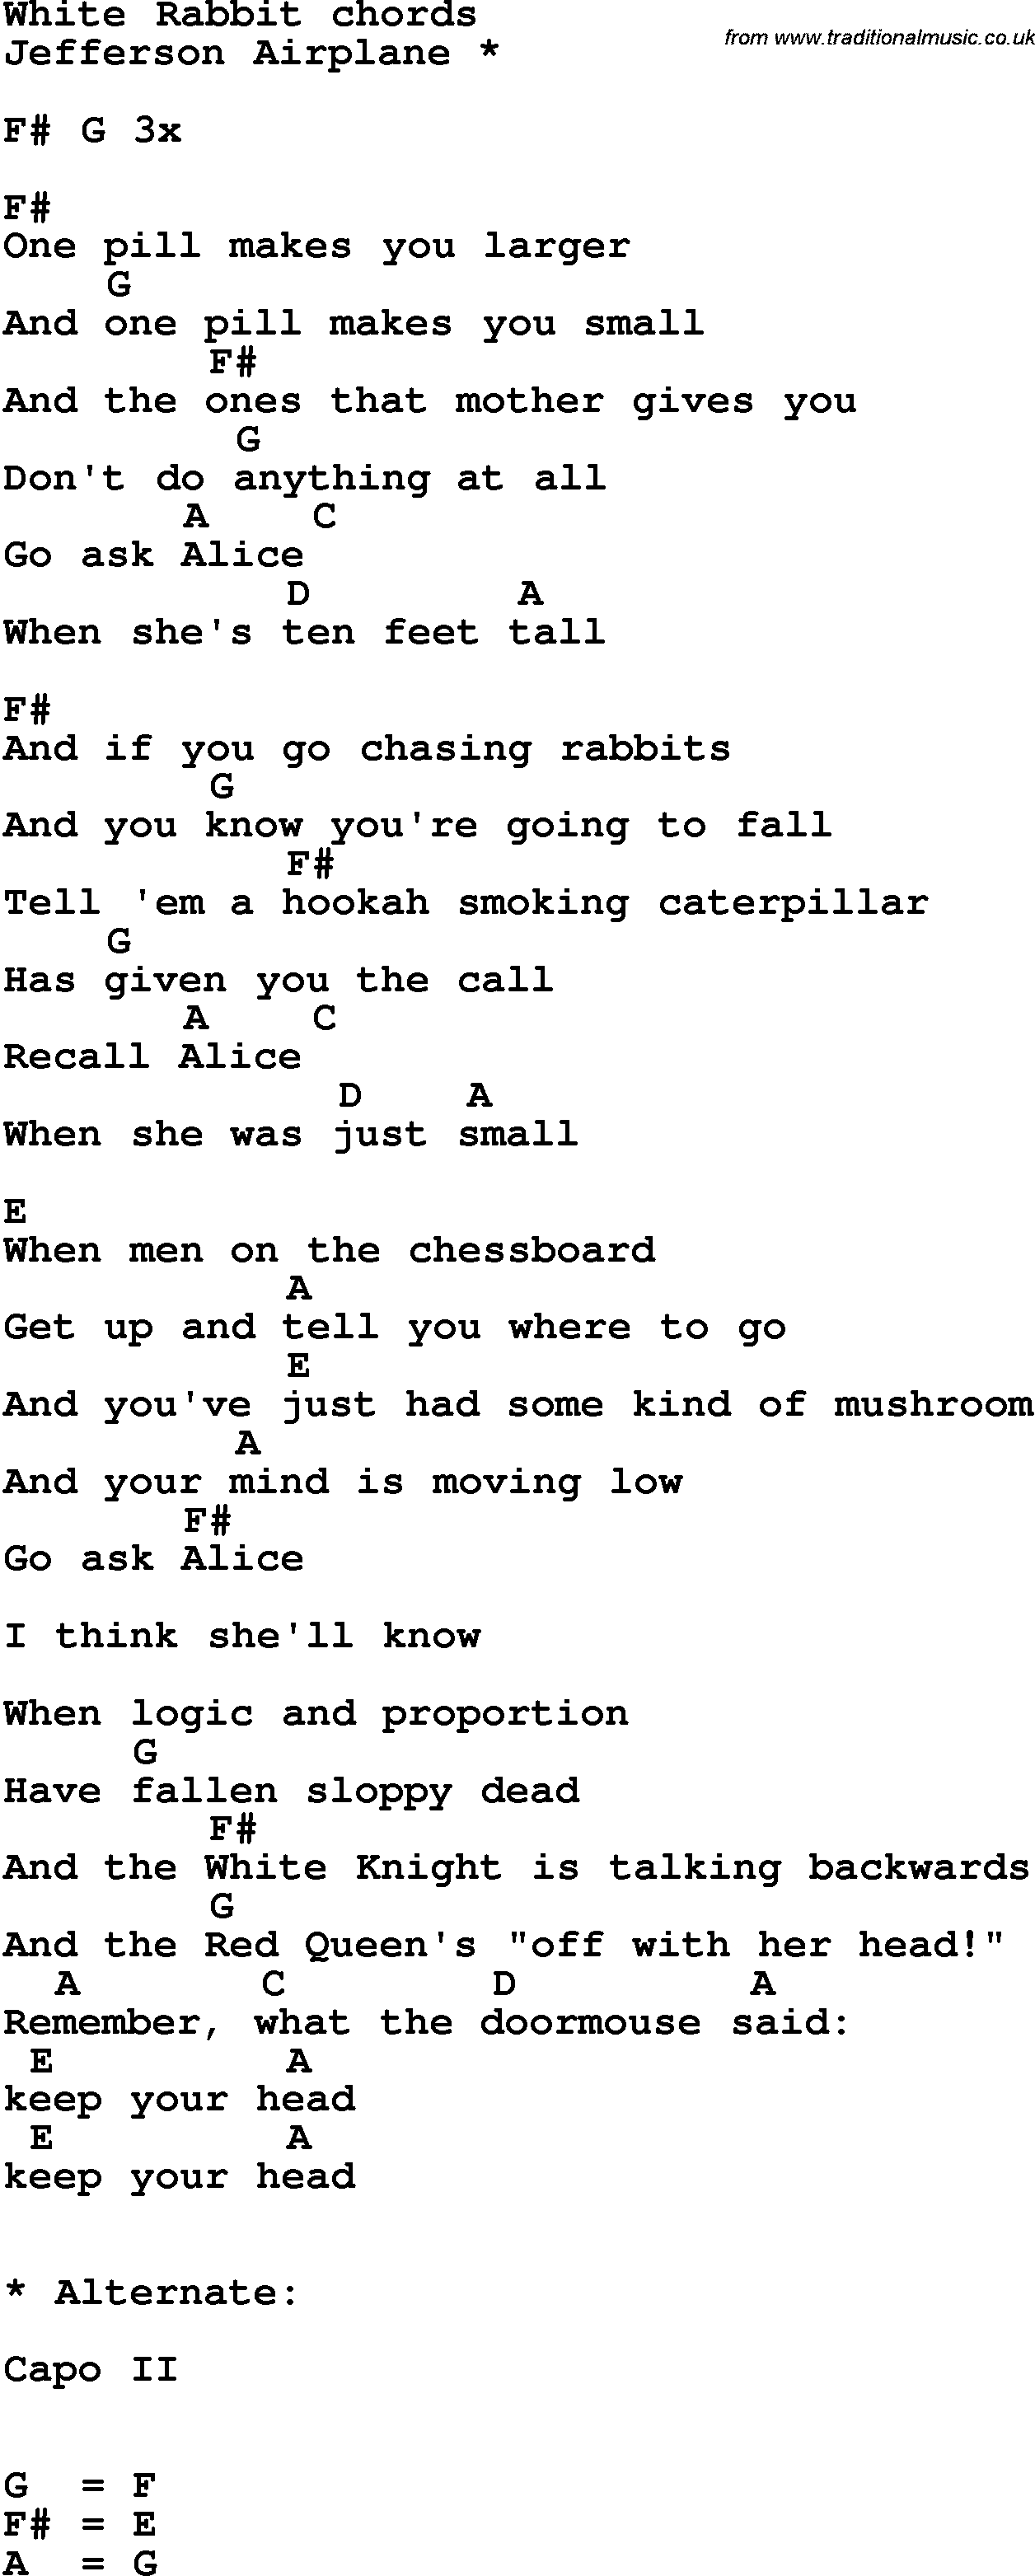 Song Lyrics with guitar chords for White Rabbit